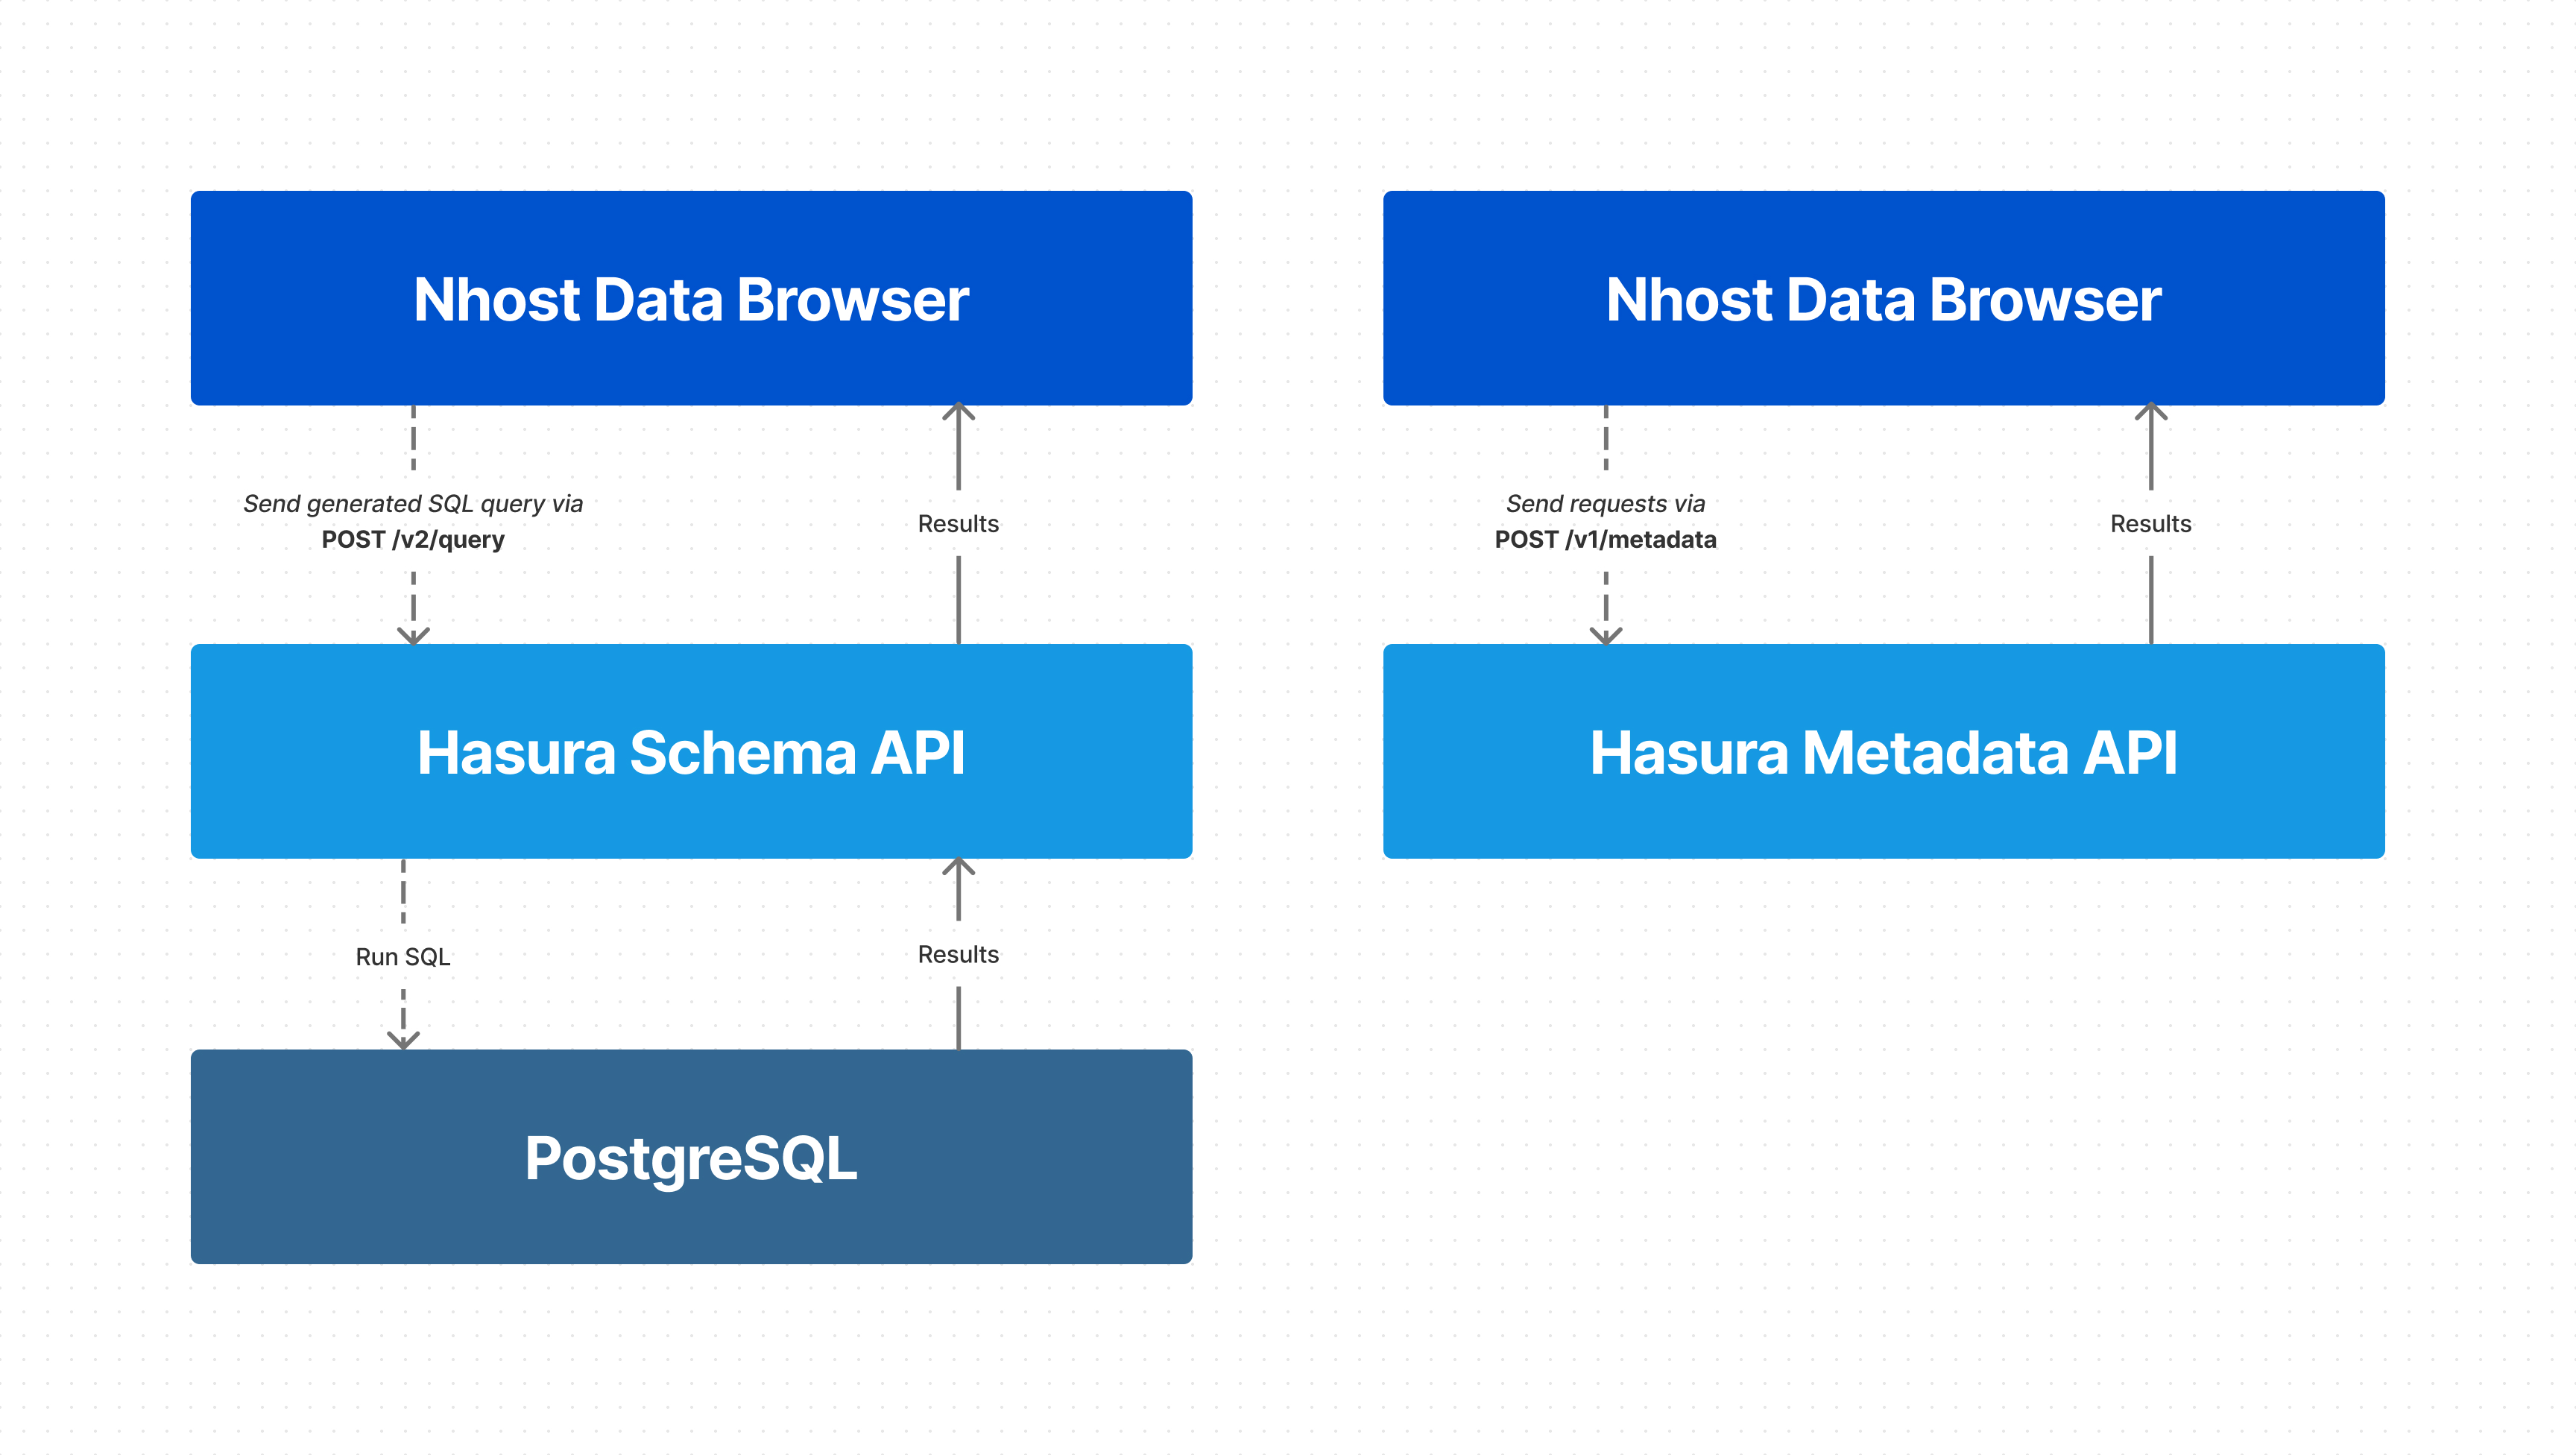 Simplified architecture diagram of the Database UI